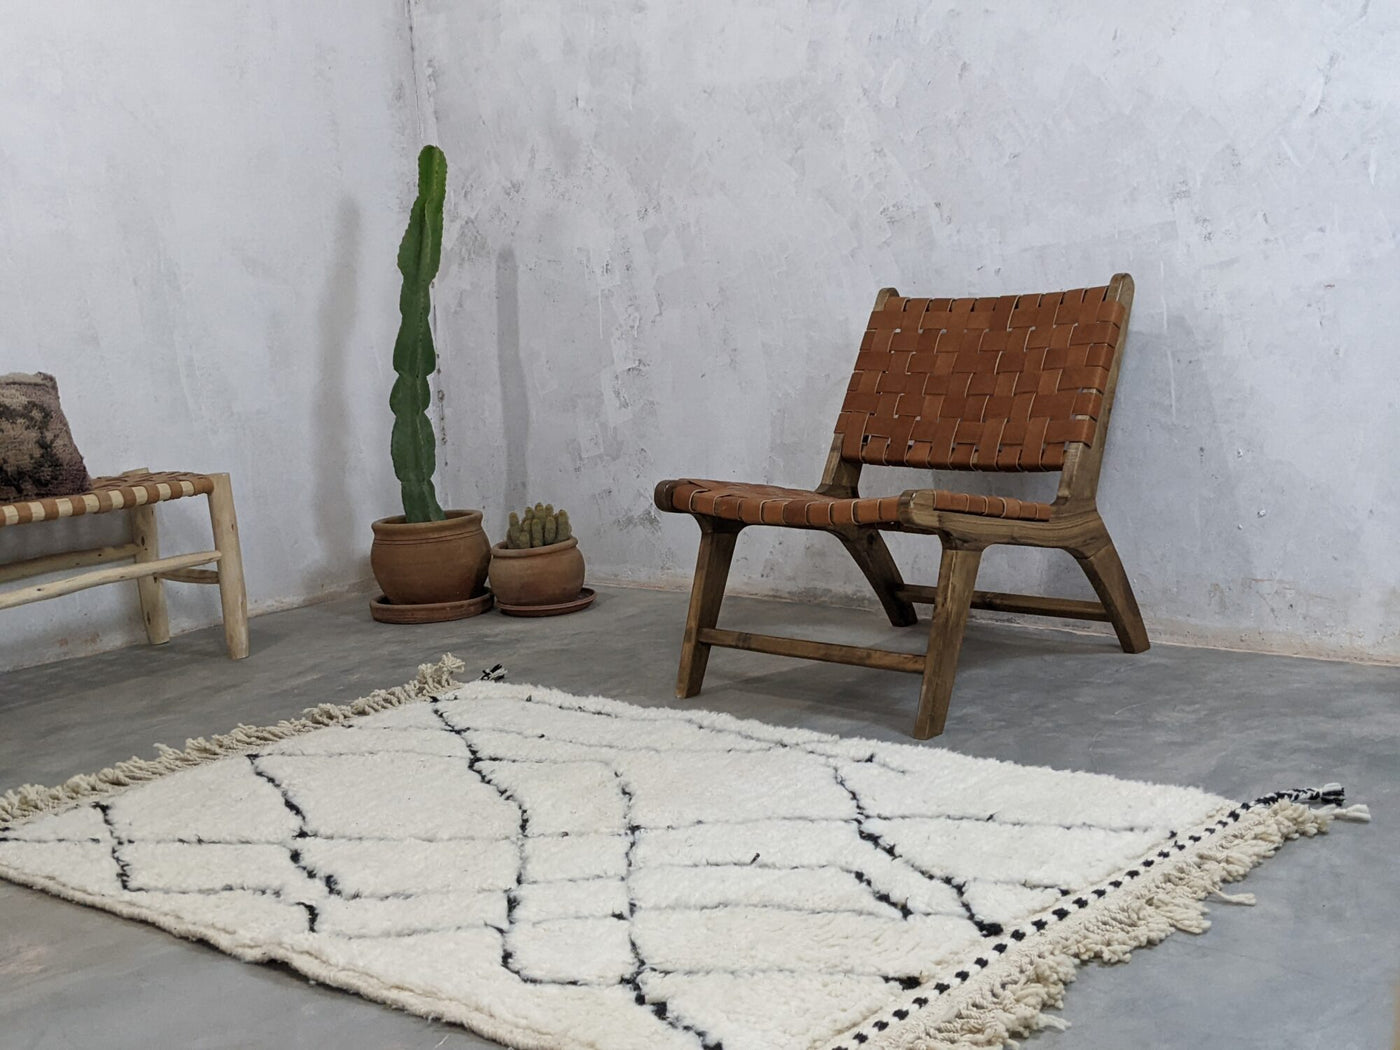 Small Moroccan Rugs - Berber Handwoven Rugs for Home Décor (160 x 110 cm)